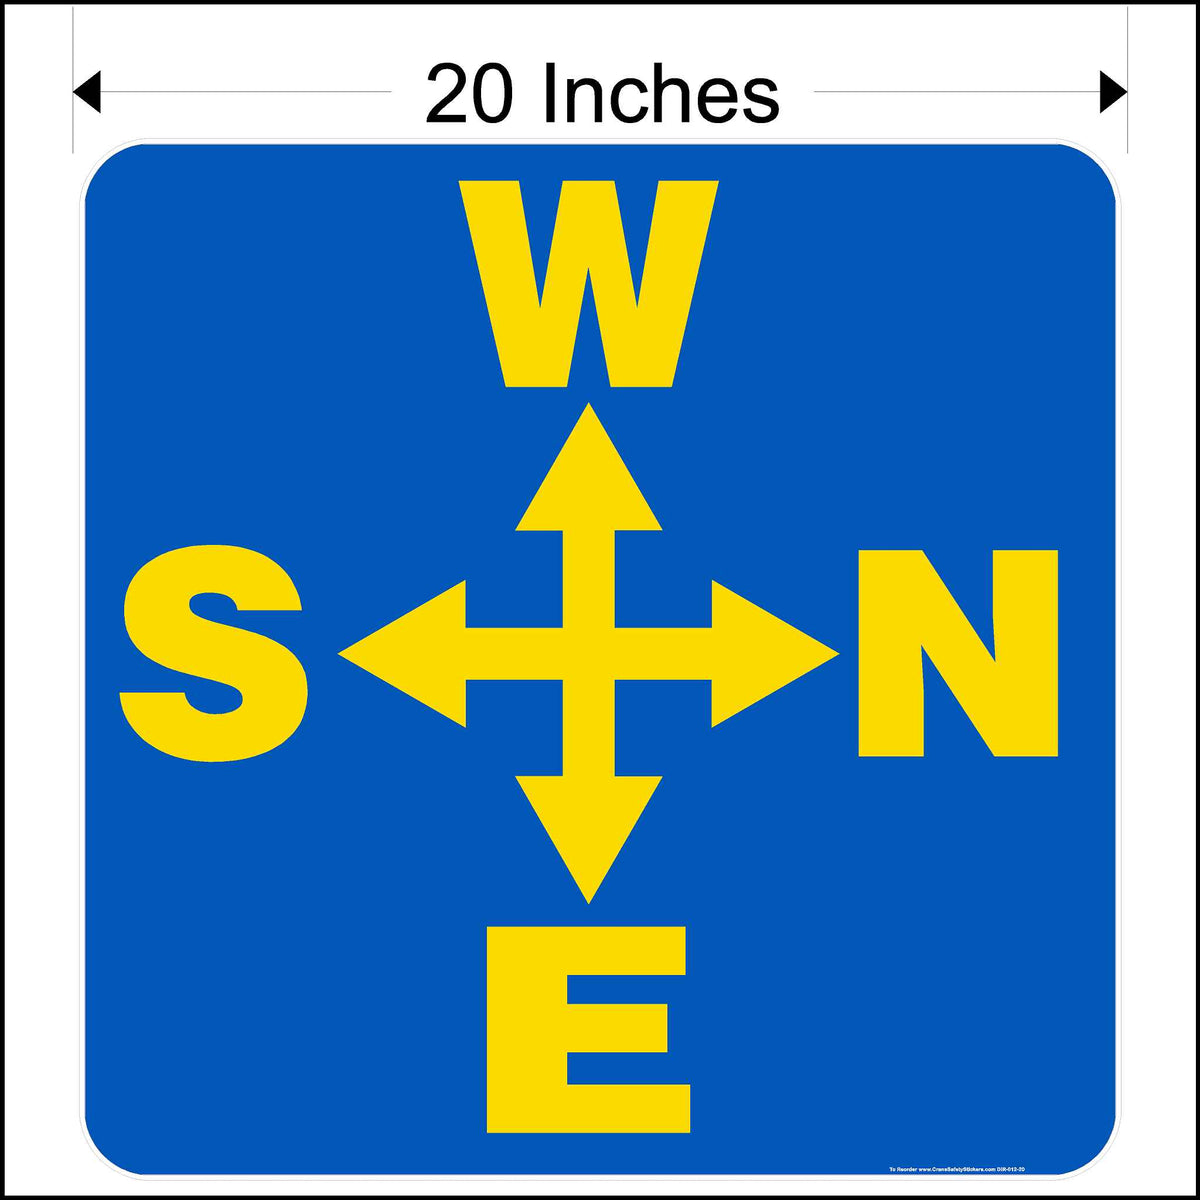 20 Inch overhead crane directional decal for the side of the crane. West, North, East, and South Arrows printed in yellow on blue background.